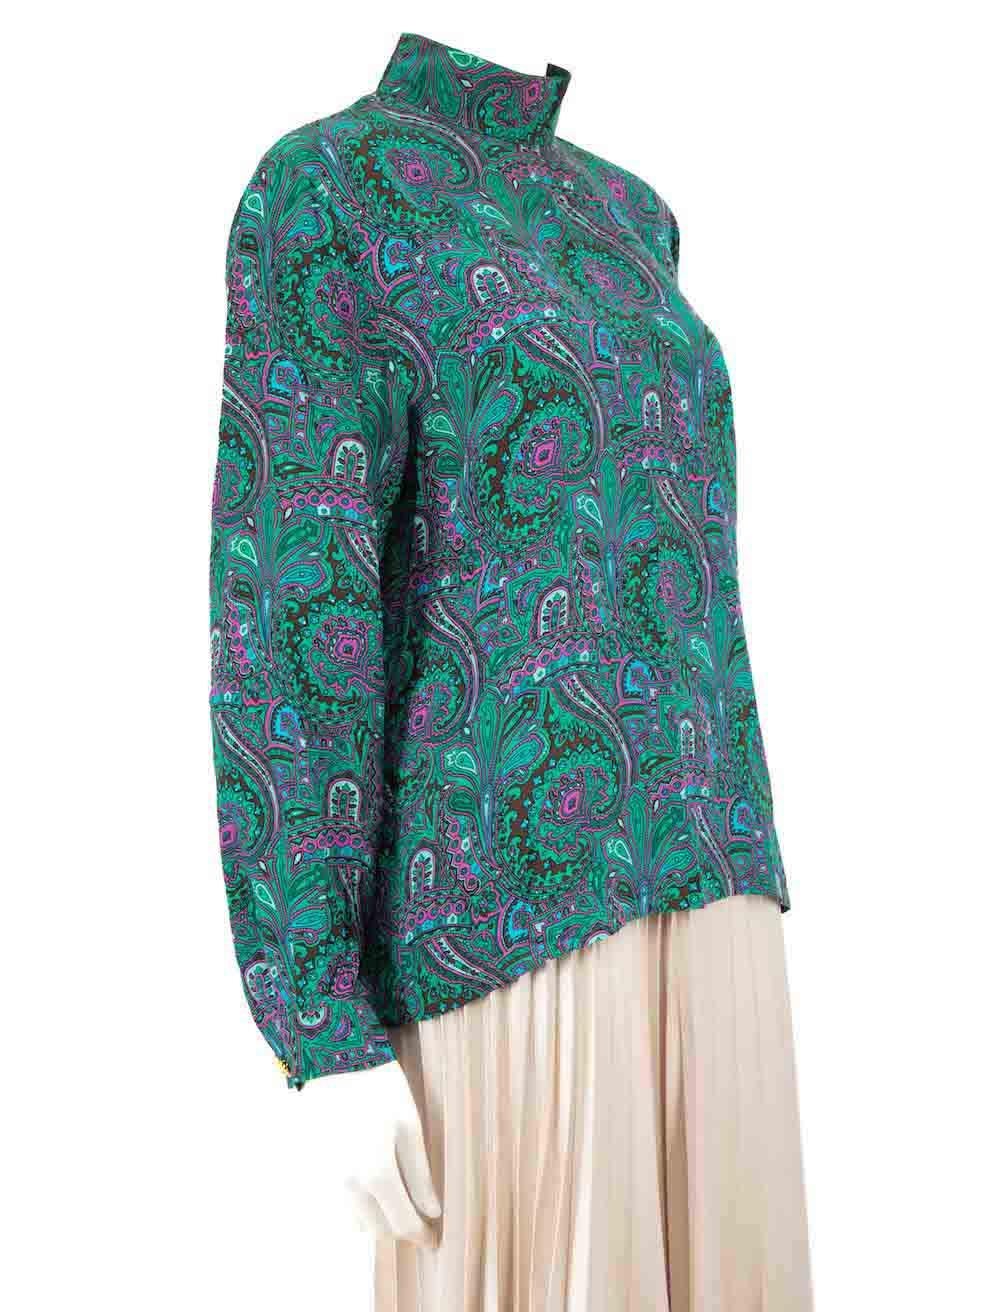 CONDITION is Very good. Hardly any visible wear to blouse is evident on this used Céline designer resale item.
 
 
 
 Details
 
 
 Multicolour - Green tone
 
 Silk
 
 Blouse
 
 Abstract pattern
 
 Long sleeves
 
 Mock neck
 
 Back button fastening
